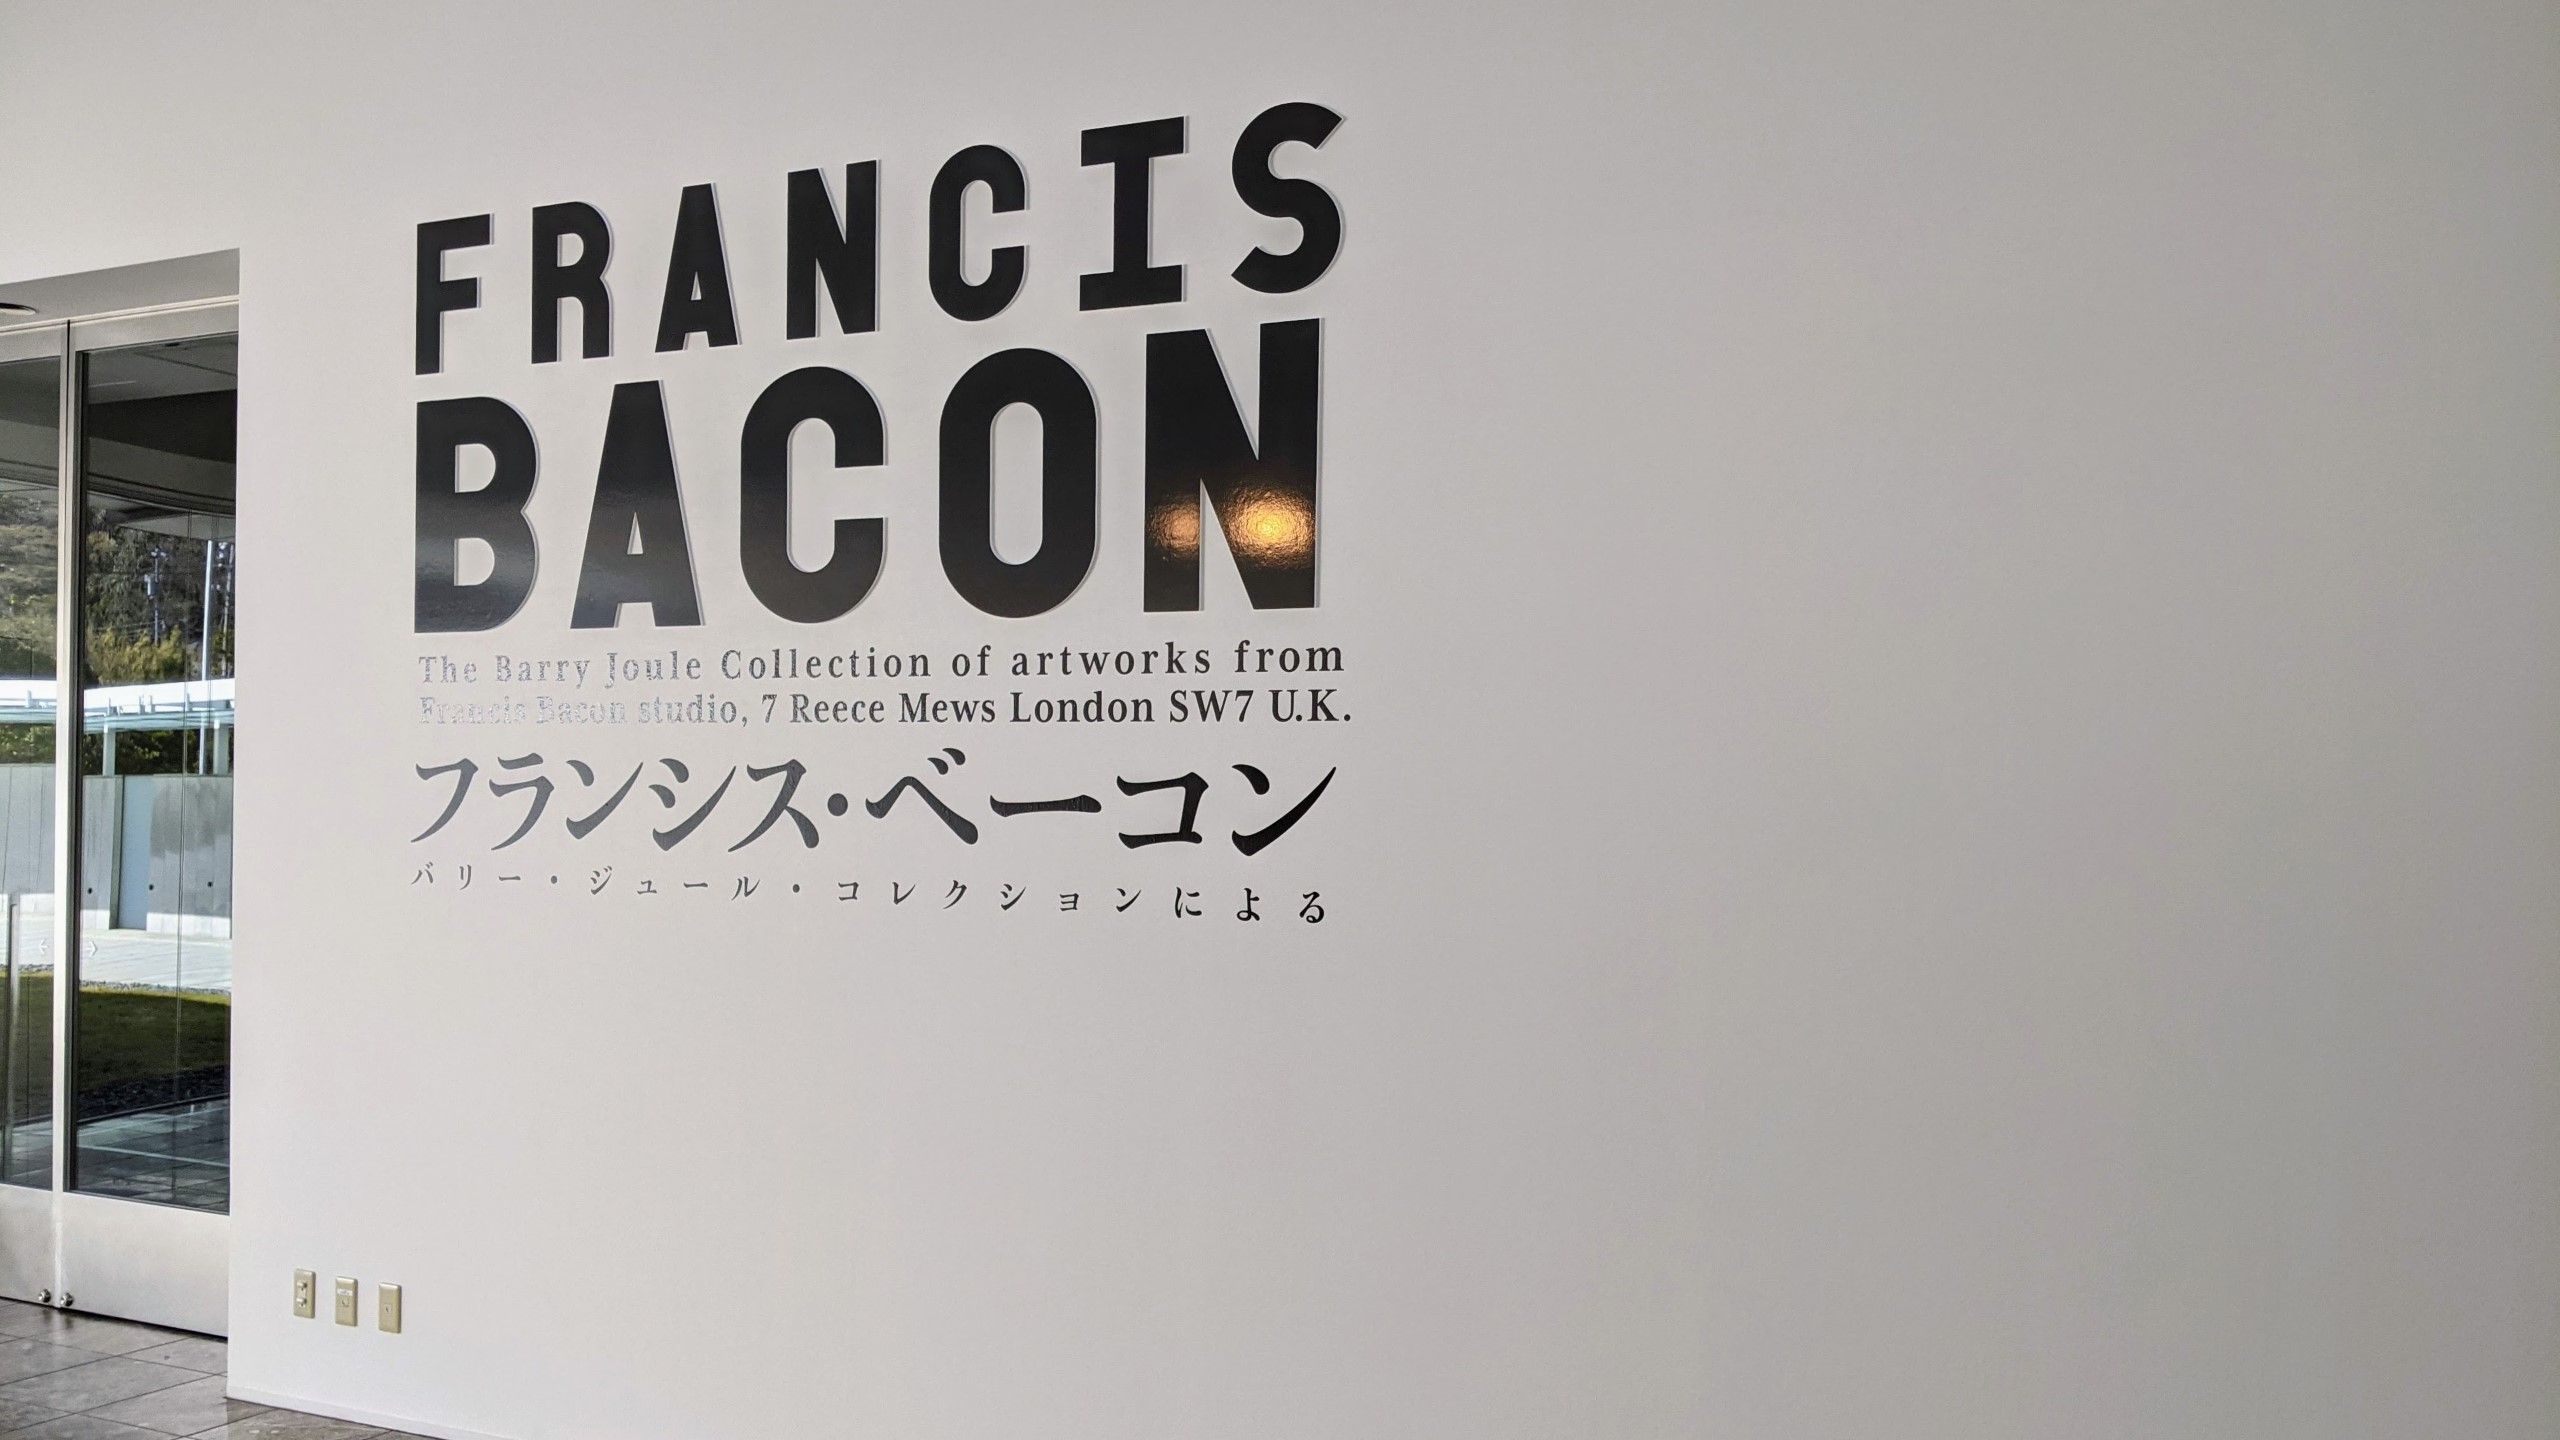 Francis Bacon The Barry Joule Collection of artworks from Francis Bacon studio, 7 Reece Mews London SW7 U.K.。